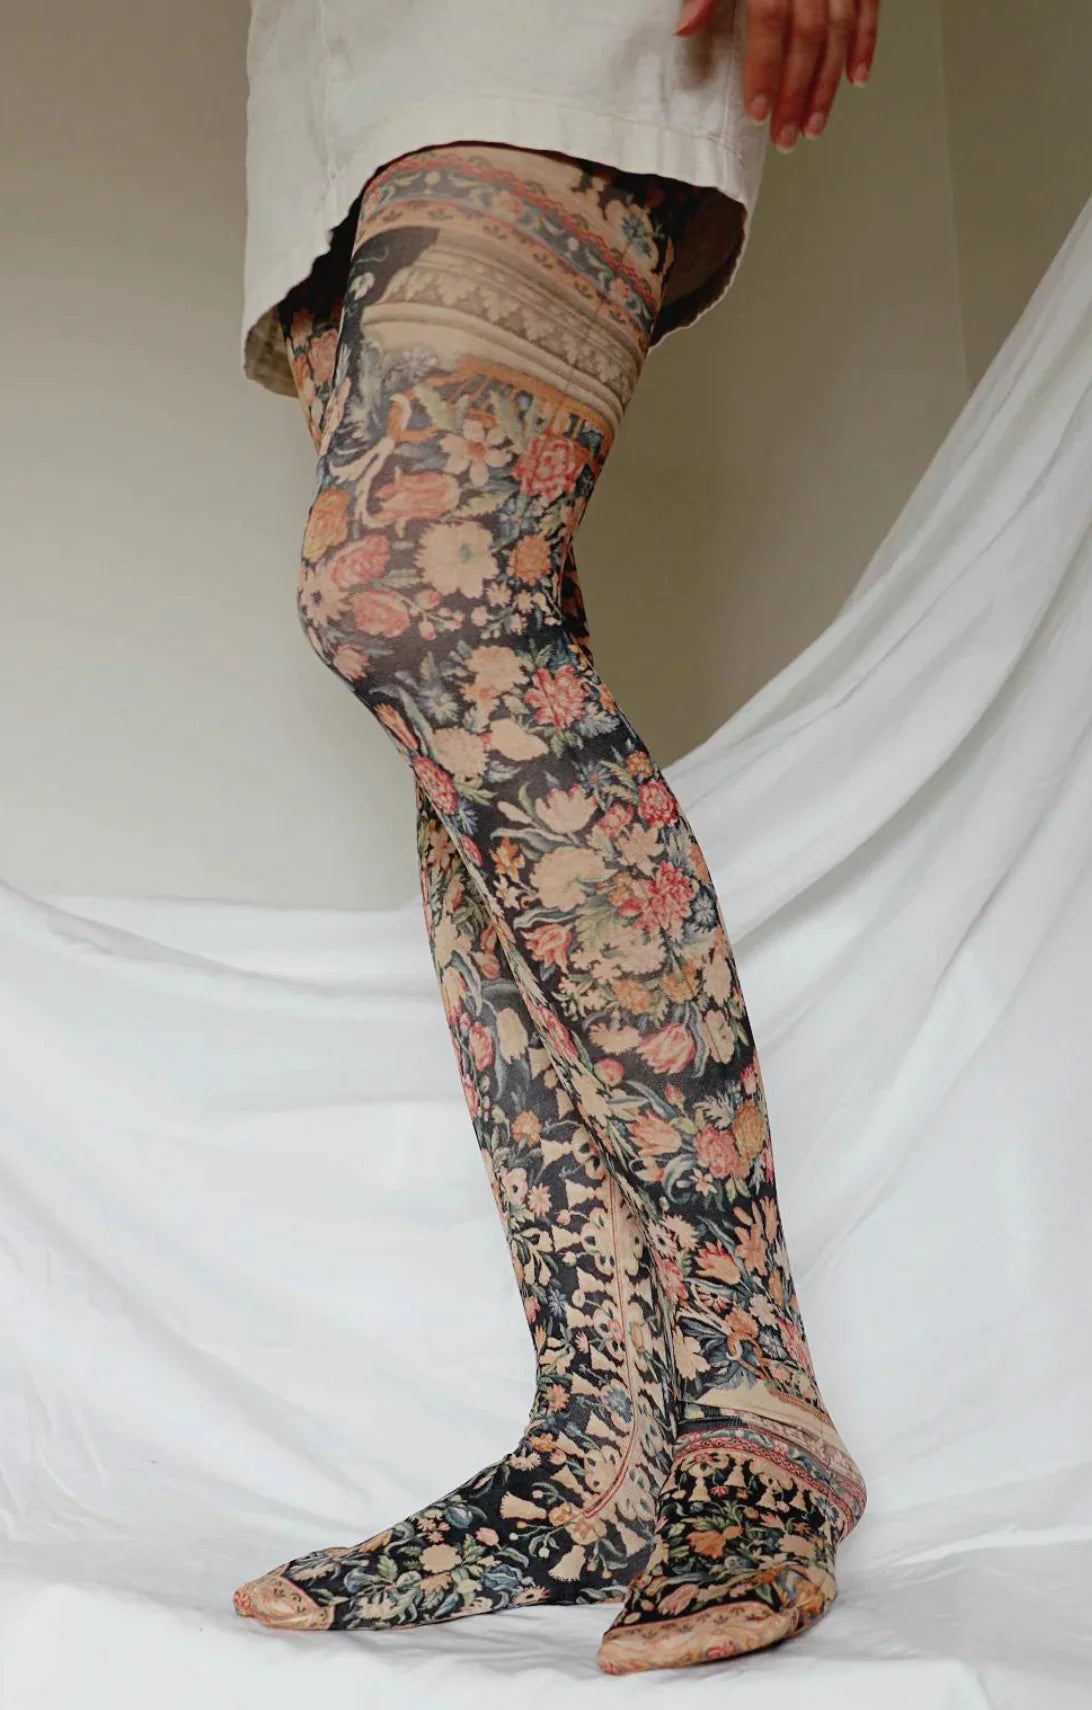 Fiore Kim Patterned Tights In Stock At UK Tights